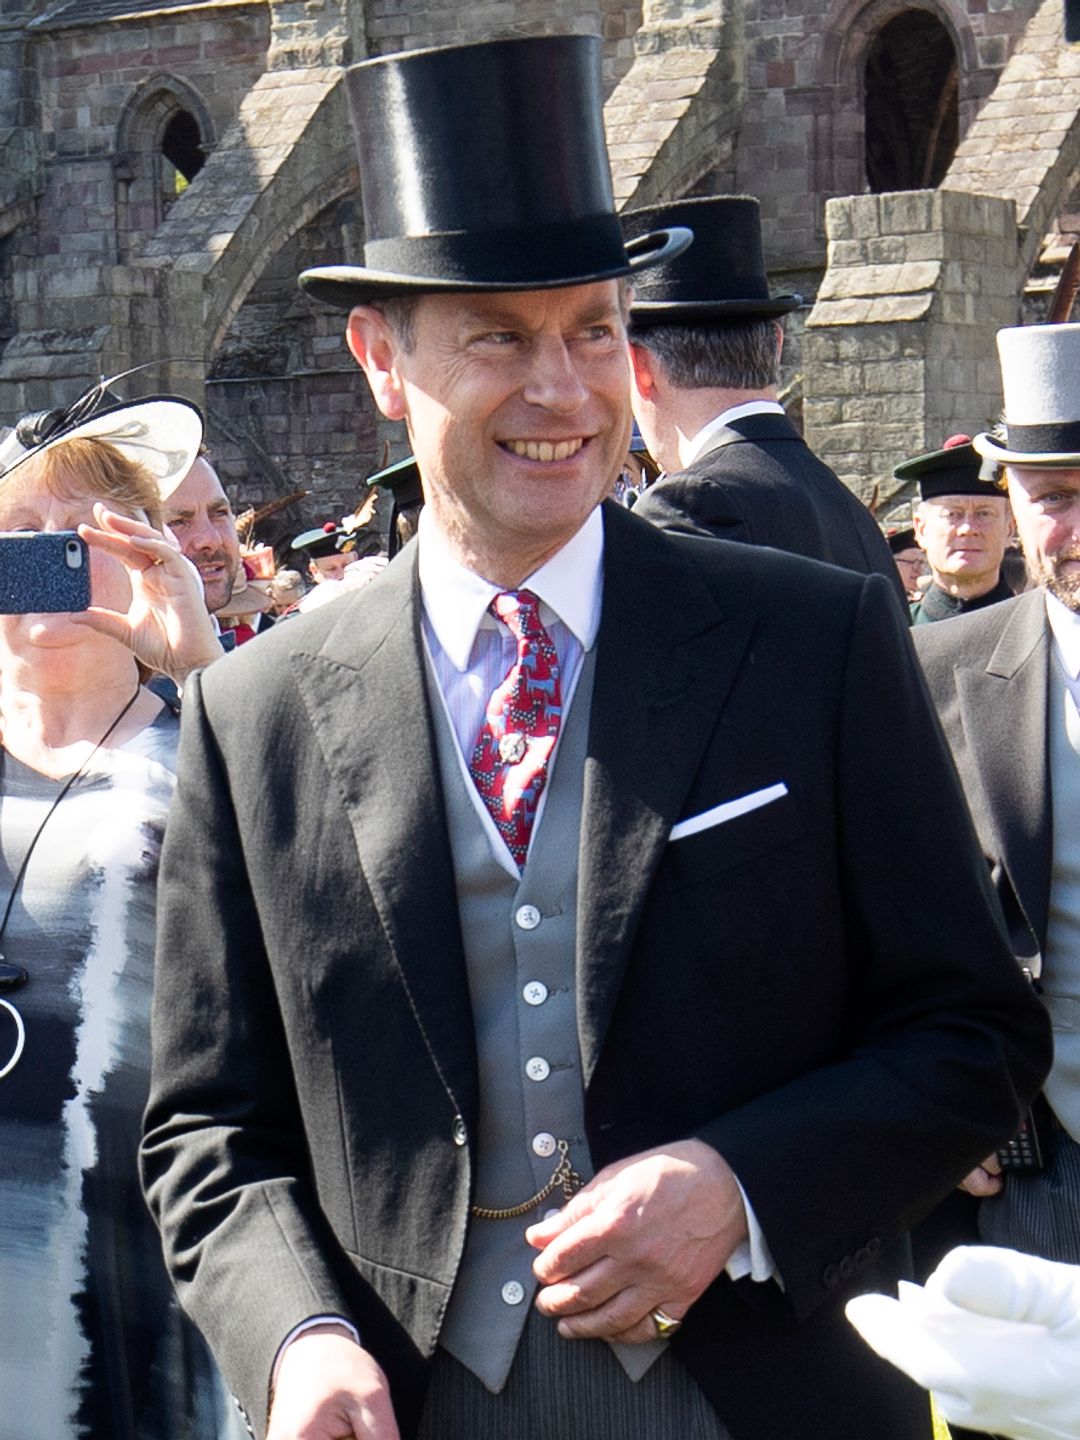 Prince Edward in a suit and top hat at a garden party